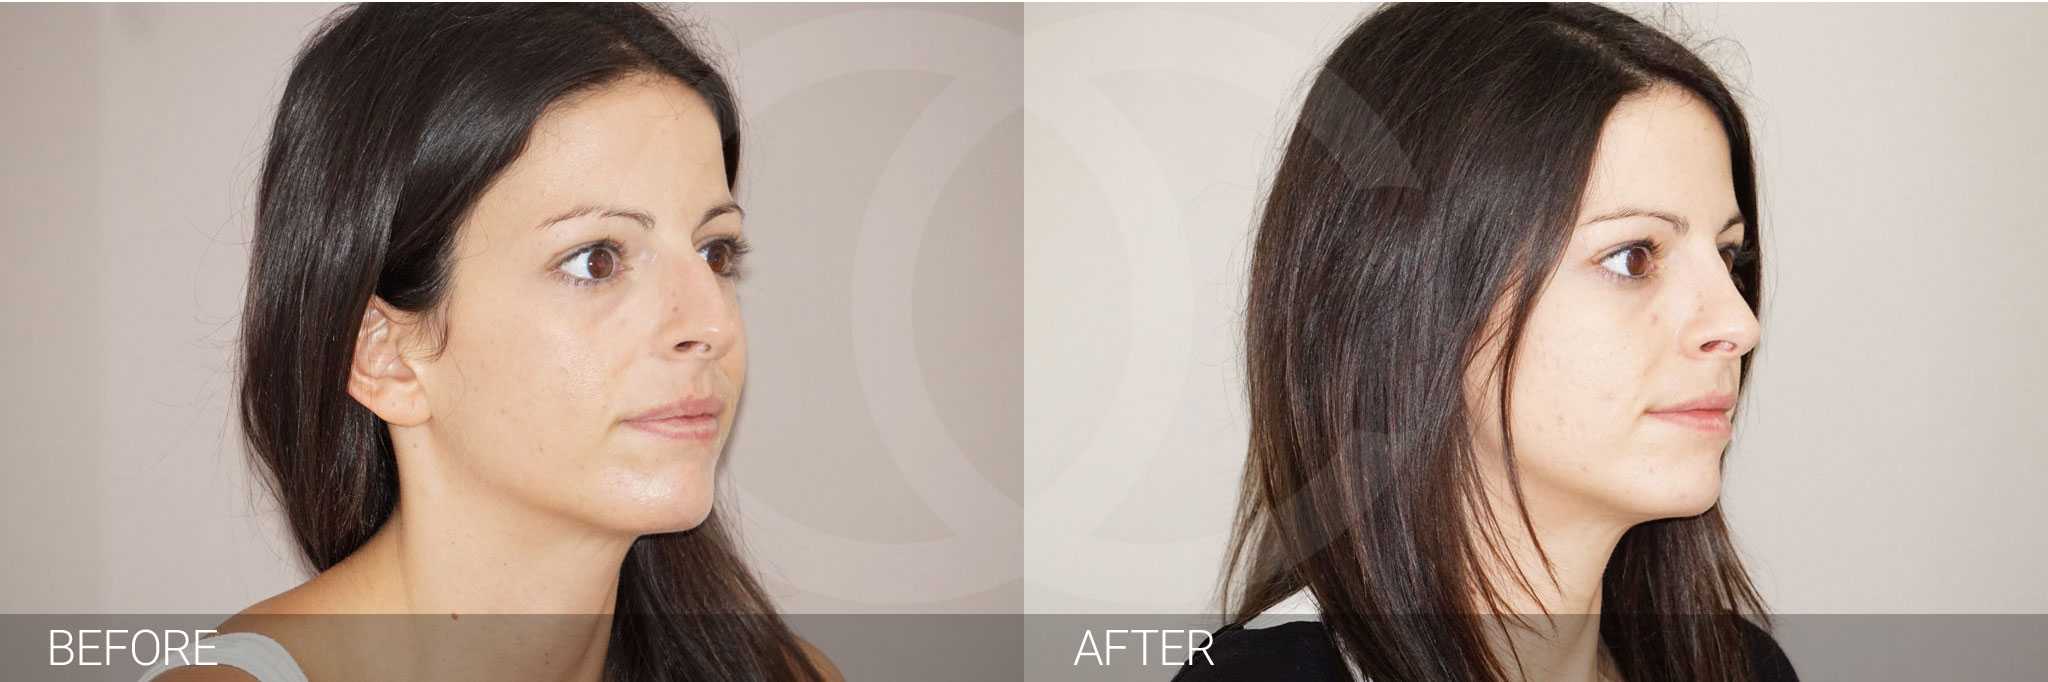 Closed Rhinoplasty, nose job photo befor and after side